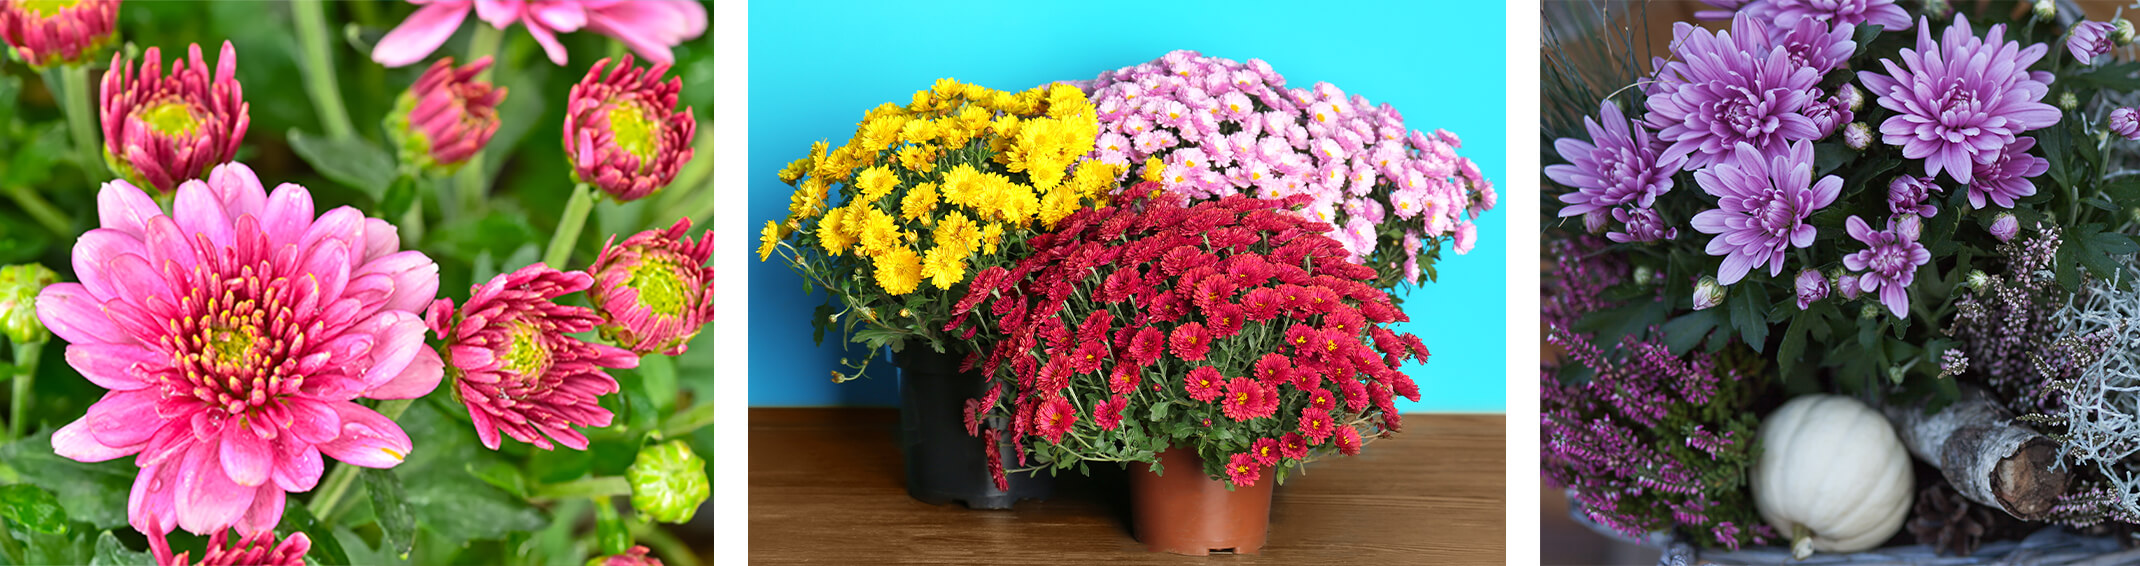 3 images - closeup of pink mums; yellow, red and pink mums against a bright turquoise wall; closeup of purple mums with other purple and silver fall foliage and a white gourd